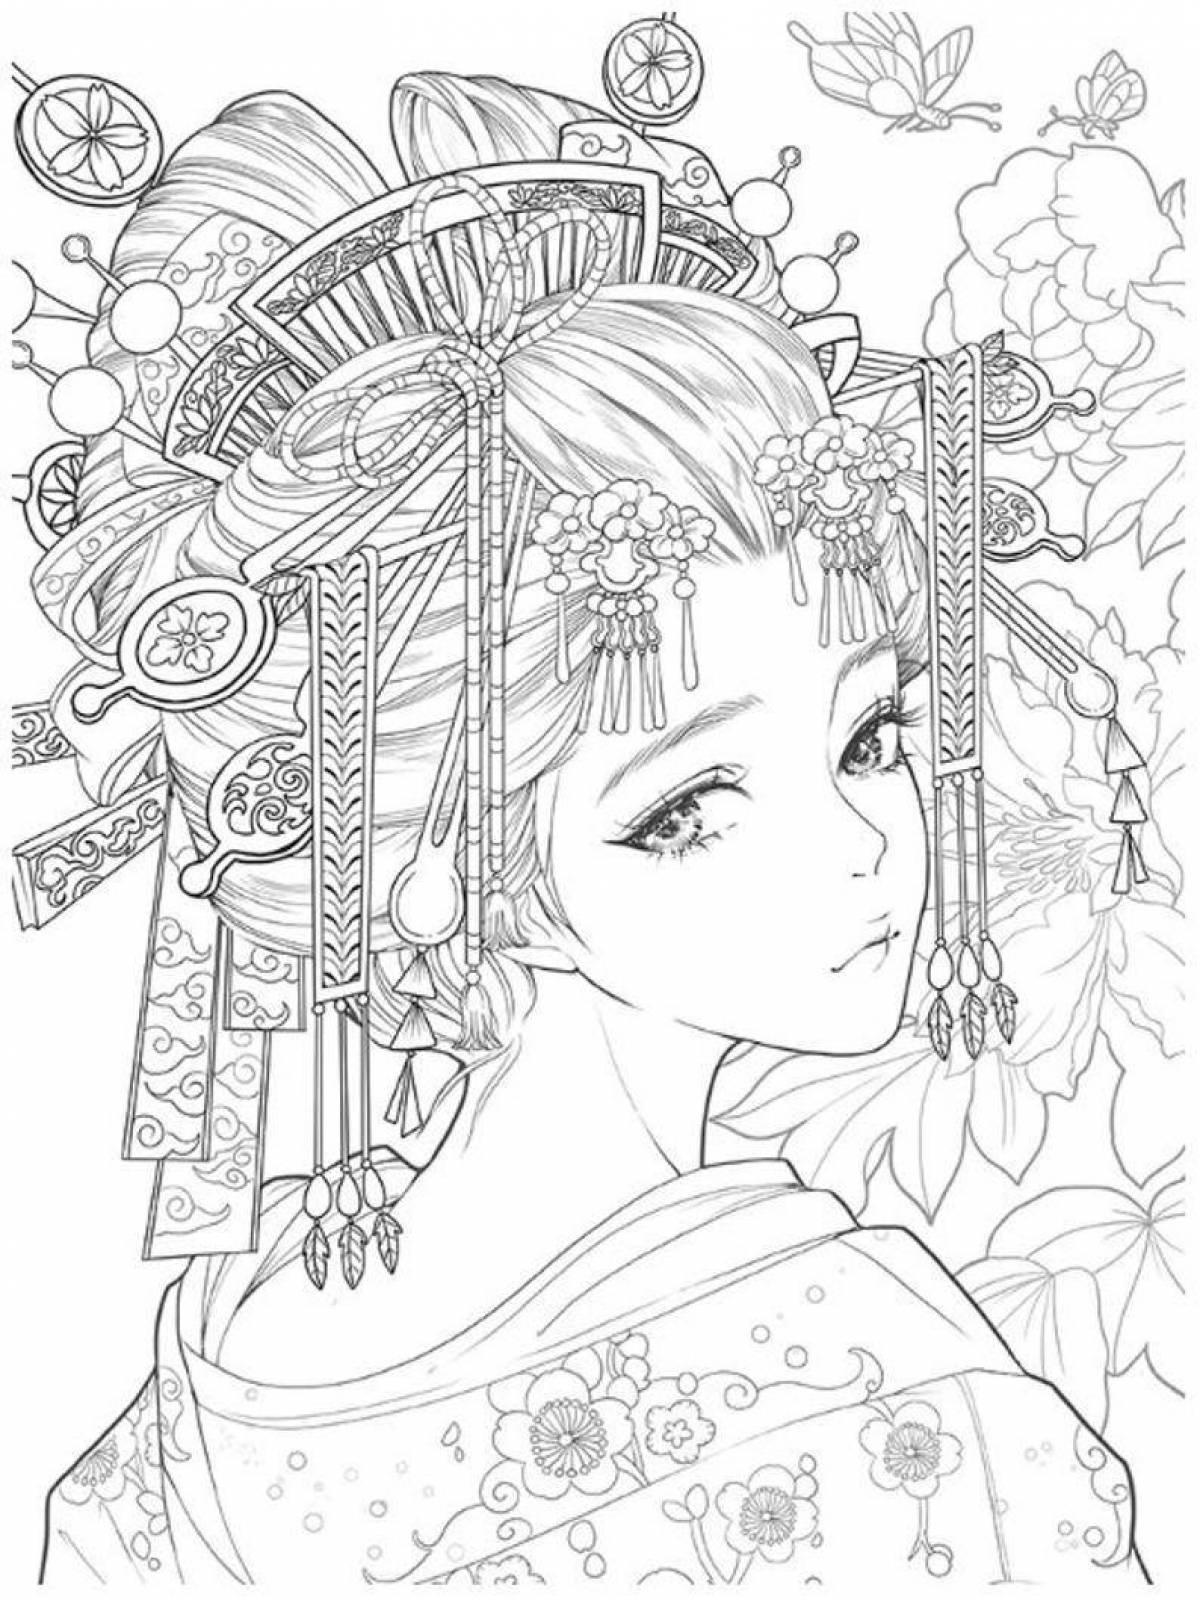 Sunshine coloring pages for girls